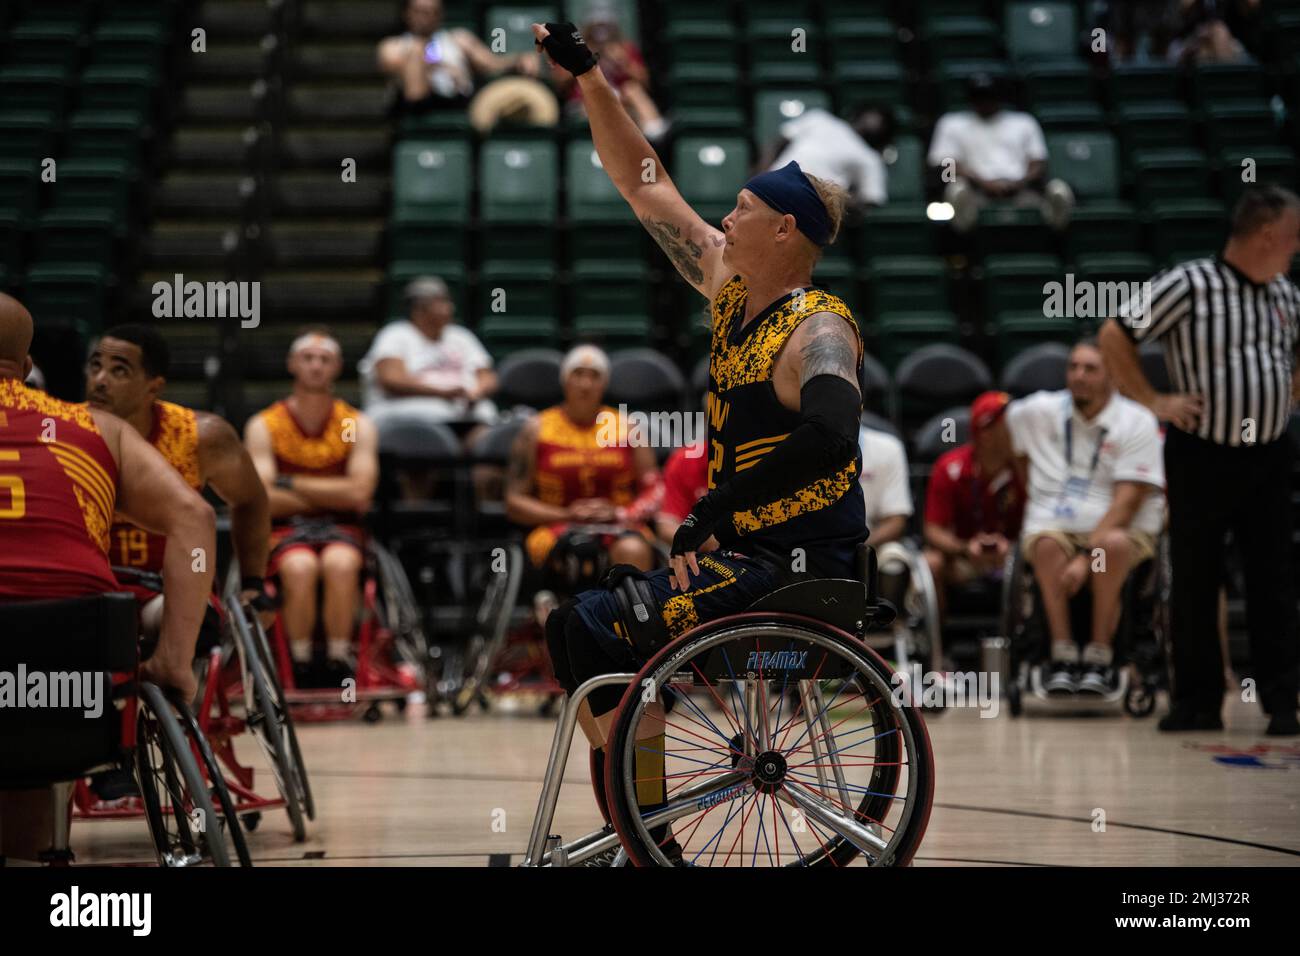 ORLANDO, Fla. (Aug. 25, 2022) Retired U.S. Navy Julius McManus. NDC, Team Navy, shoots a ball from the free throw line during the wheelchair basketball game at the DoD Warrior Games, Aug. 25, 2022. The Warrior Games are composed of over 200 wounded, ill and injured service members and veteran athletes, competing in 12 adaptive sporting events Aug. 19-28, 2022 at the ESPN Wide World of Sports Complex in Orlando, Florida. Stock Photo